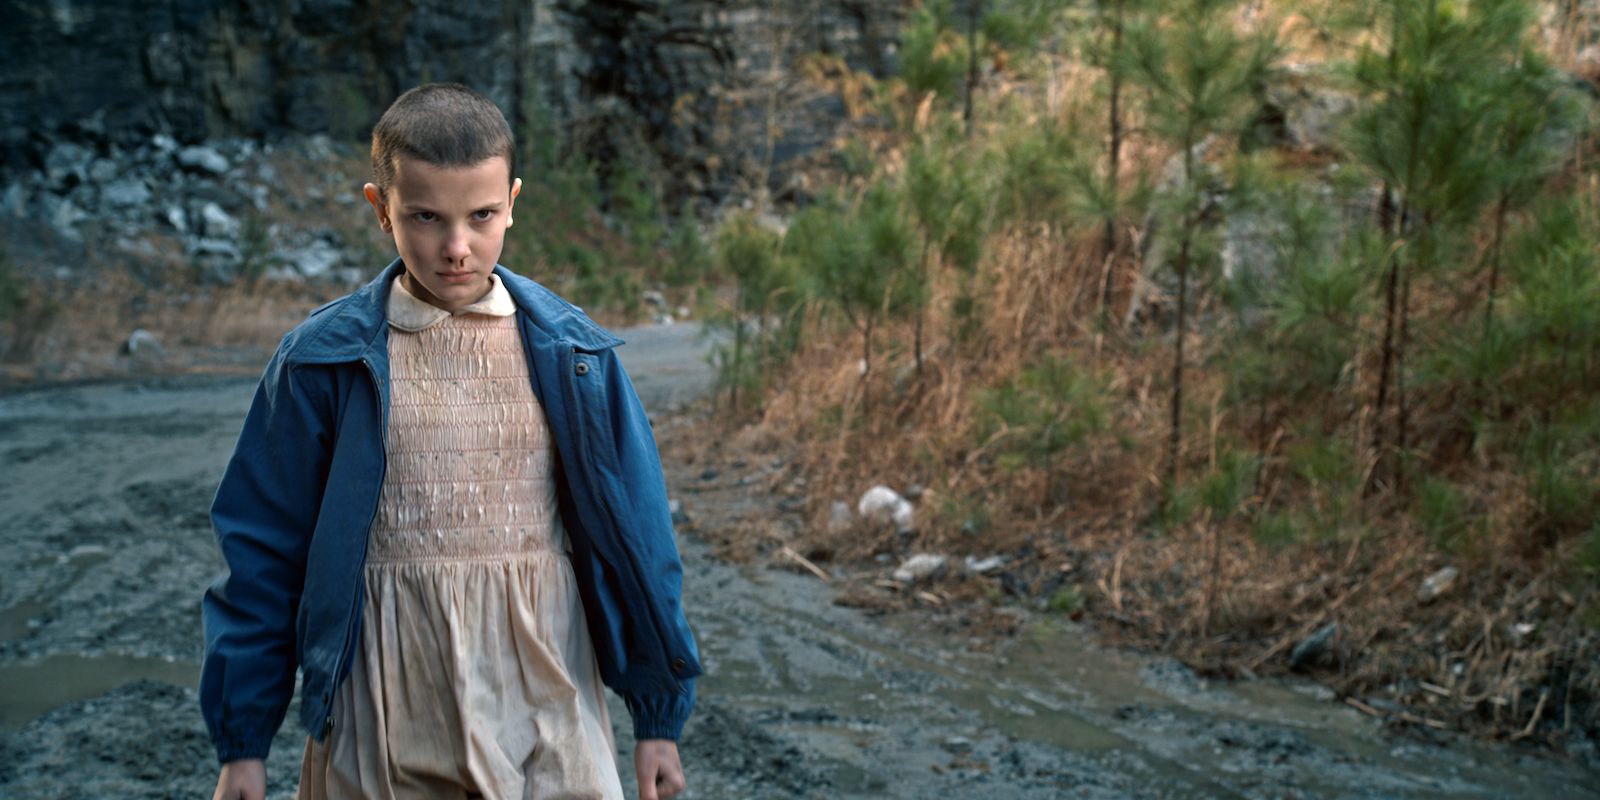 Stranger Things' pics tease Millie Bobby Brown character fate